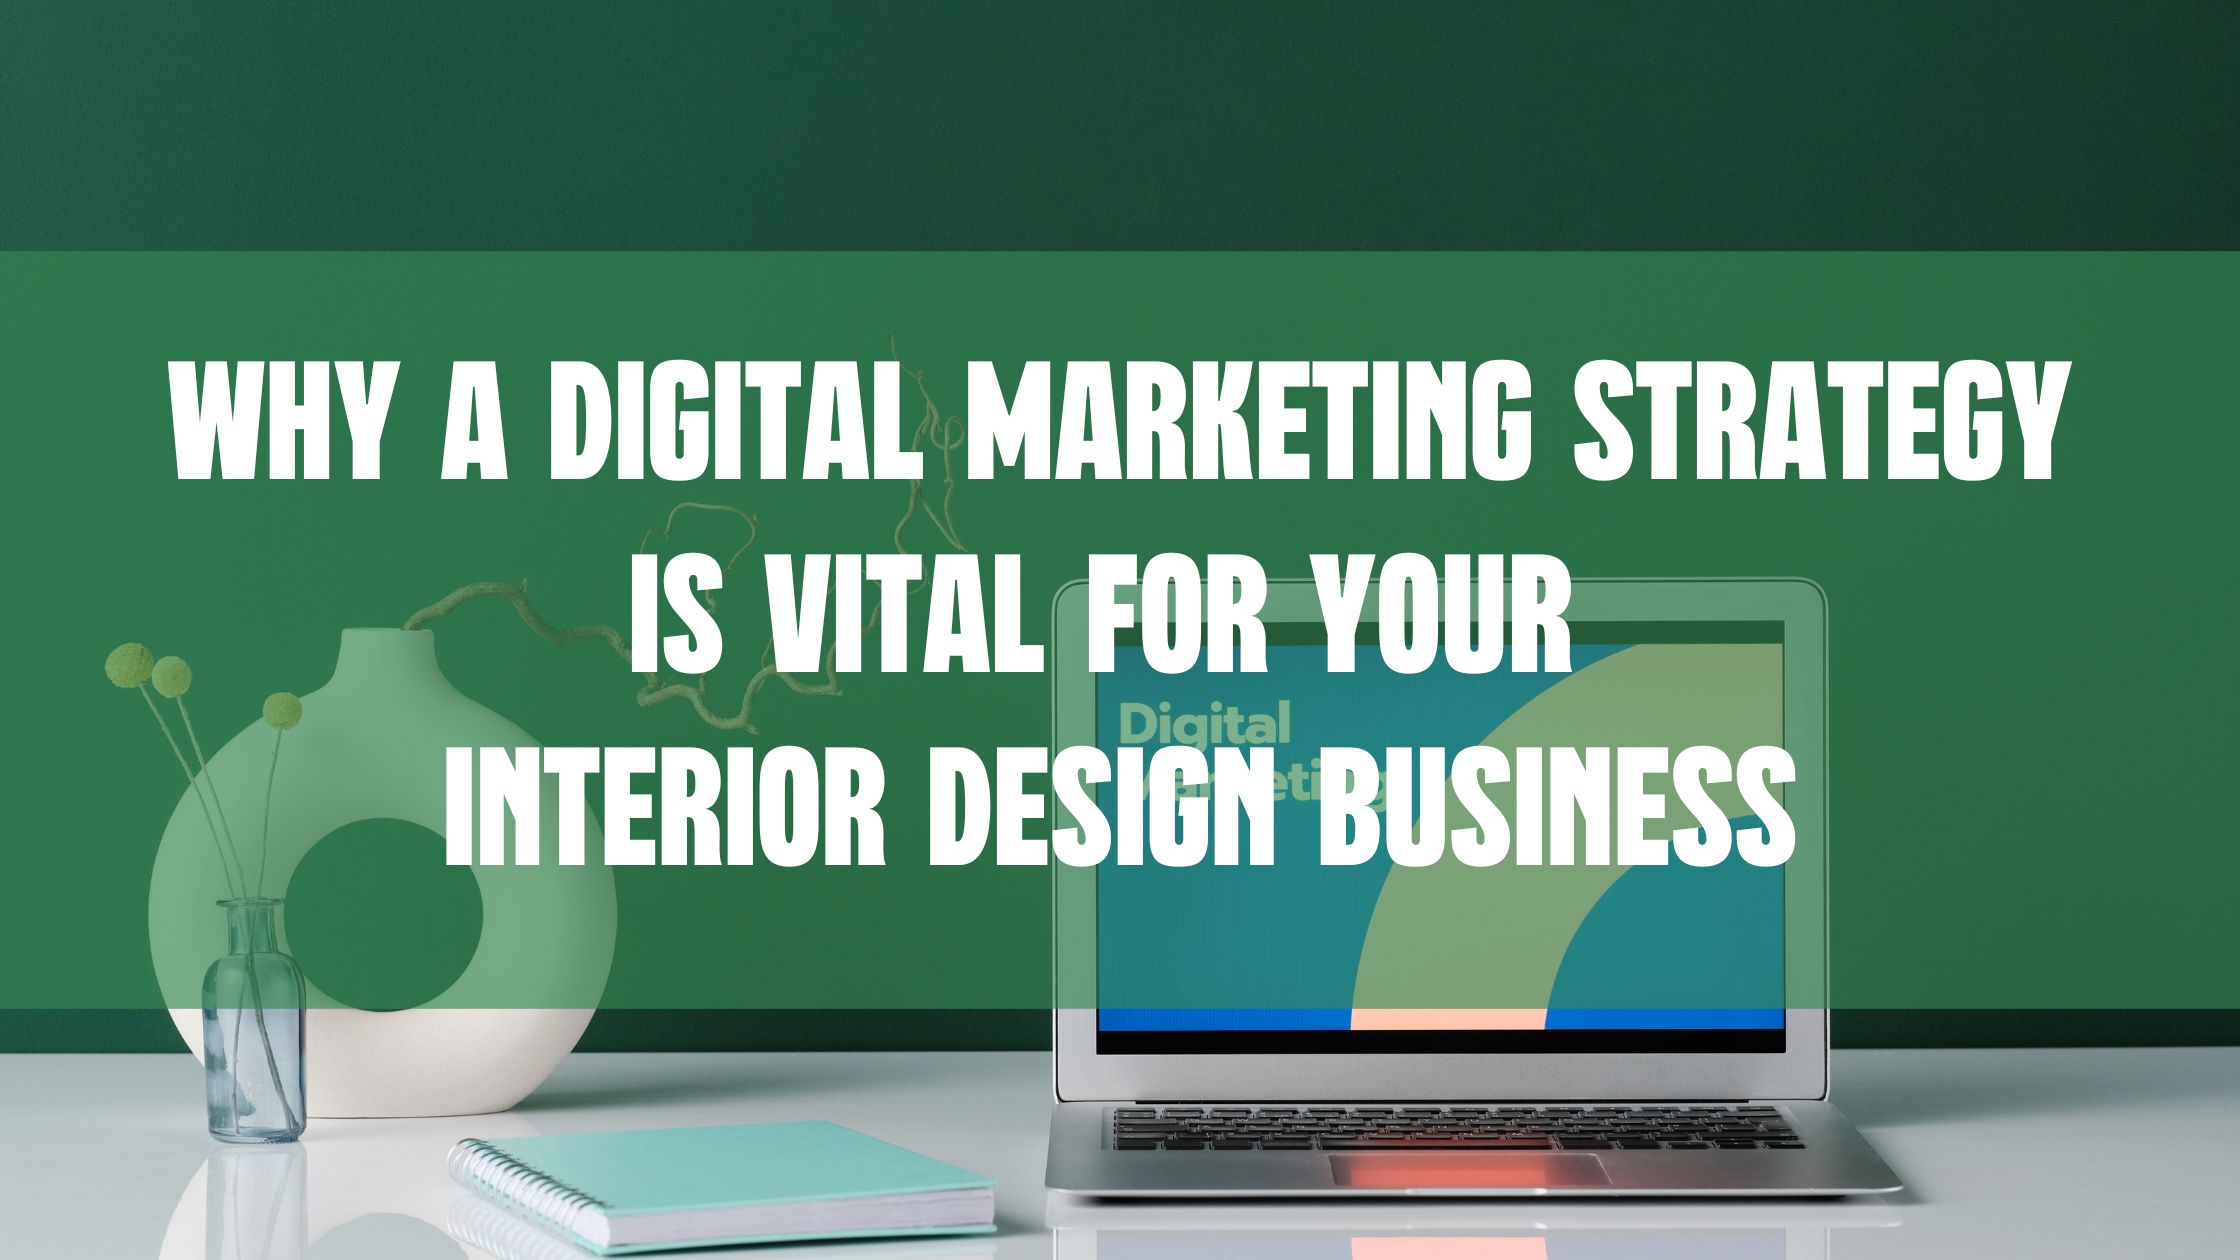 WHY A DIGITAL MaRKETING STRATEGY IS VITAL FOR YOUR INTERIOR DESIGN BUSINESS by Interior design business coach Eric Lee